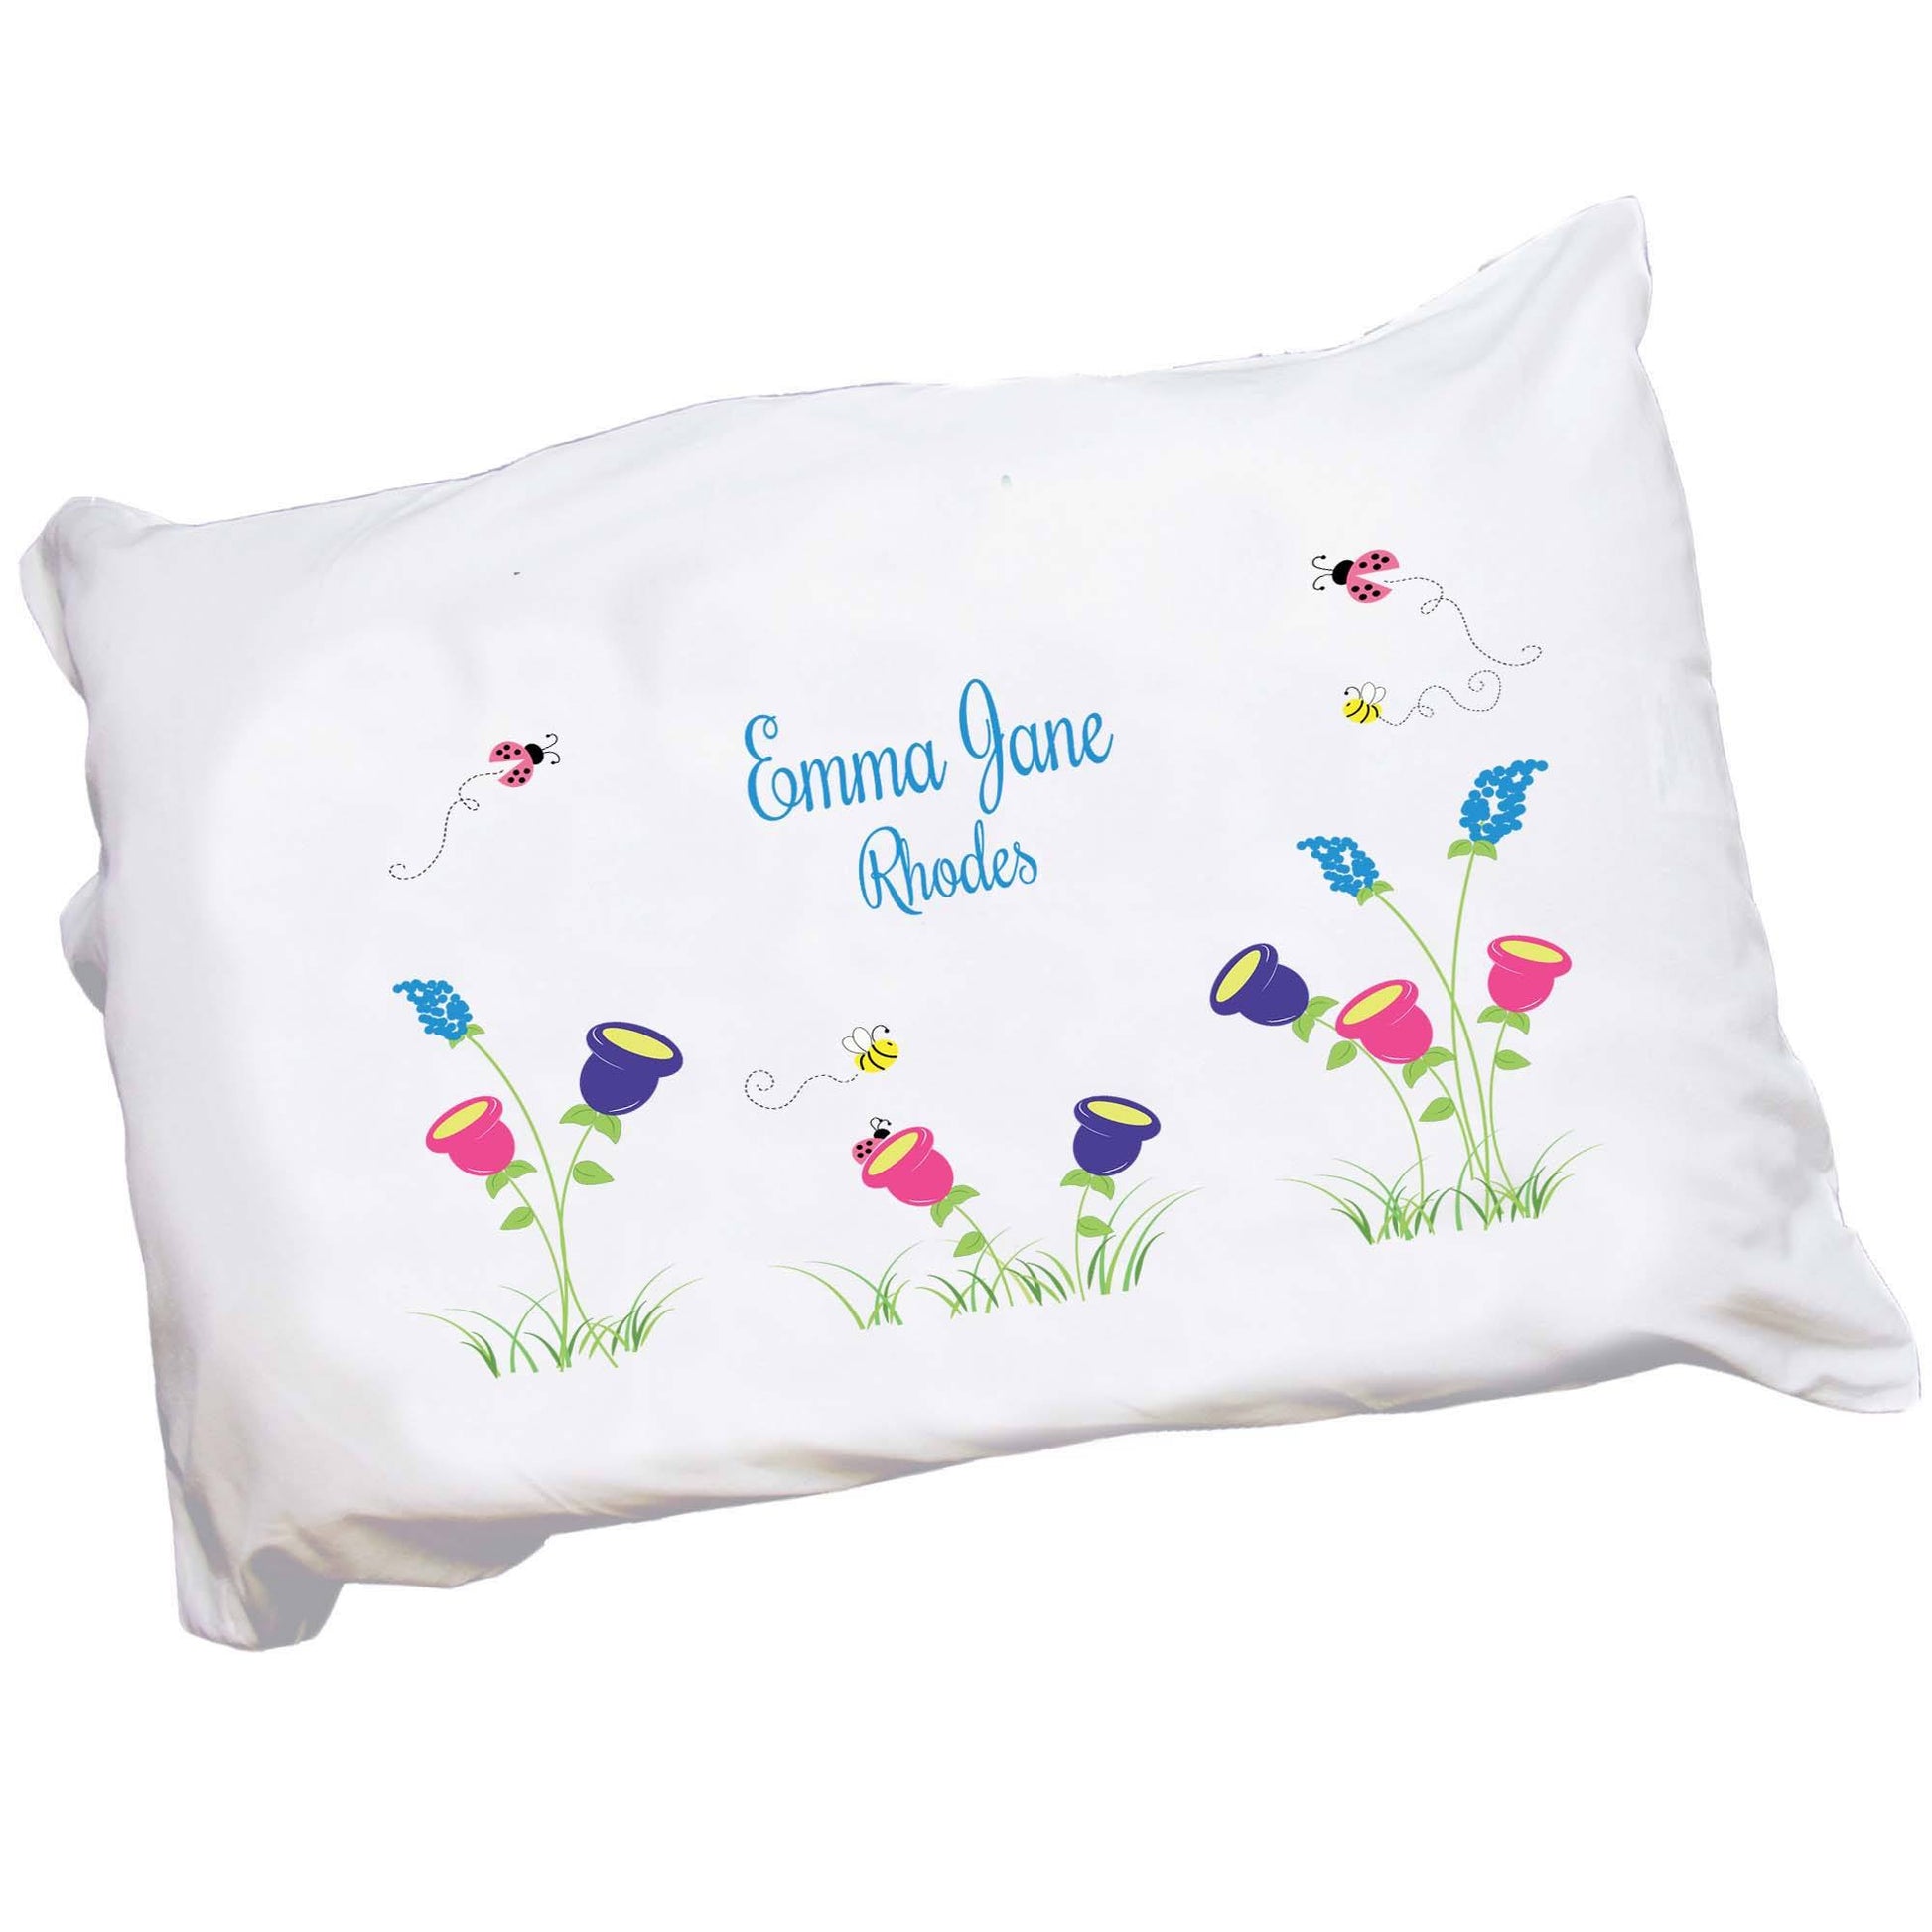 Personalized Childrens Pillowcase with English Garden design